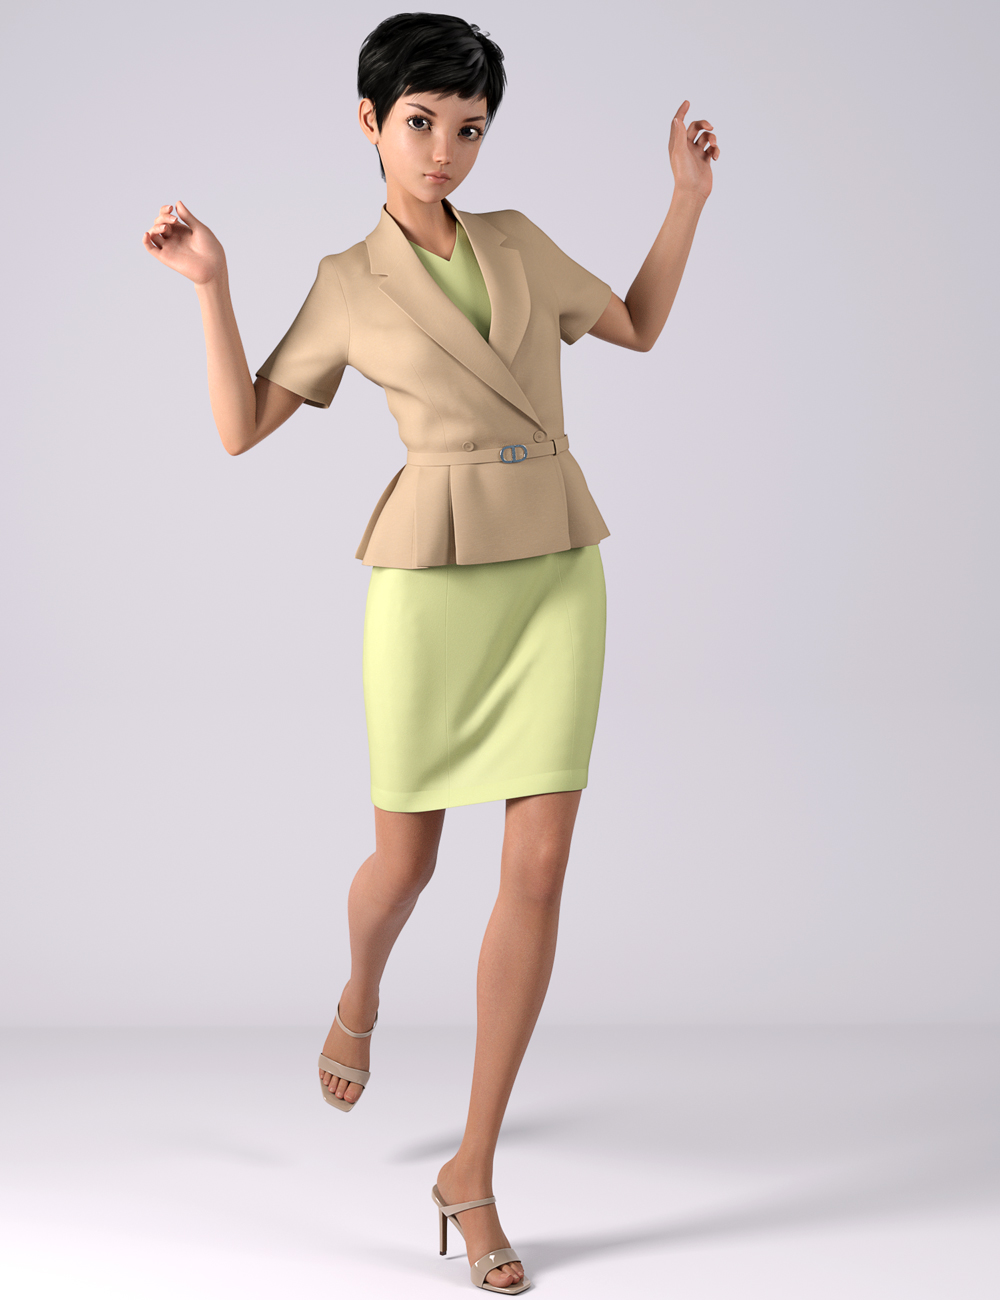 dForce HnC Summer Office Outfits for Genesis 8.1 Females_DAZ3DDL